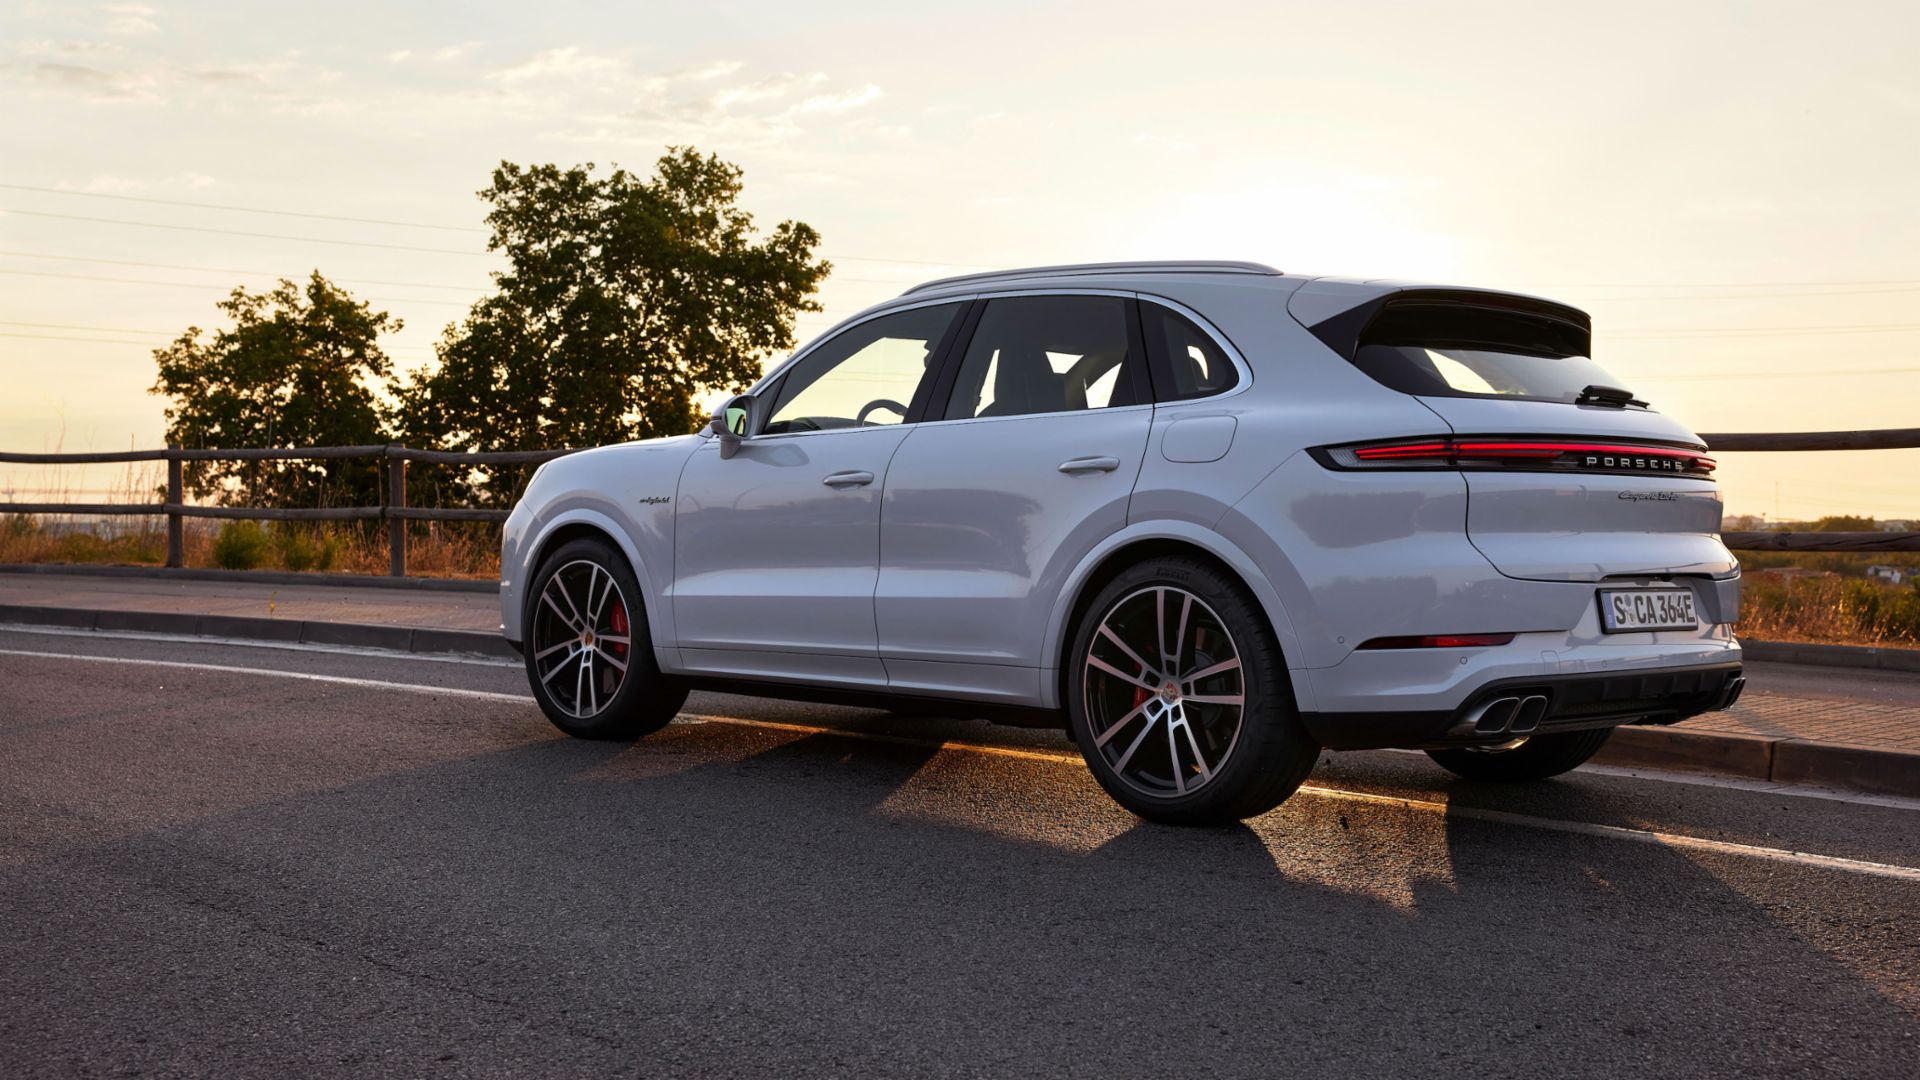 The 2023 Porsche Cayenne Turbo E-Hybrid is the most powerful Cayenne ever